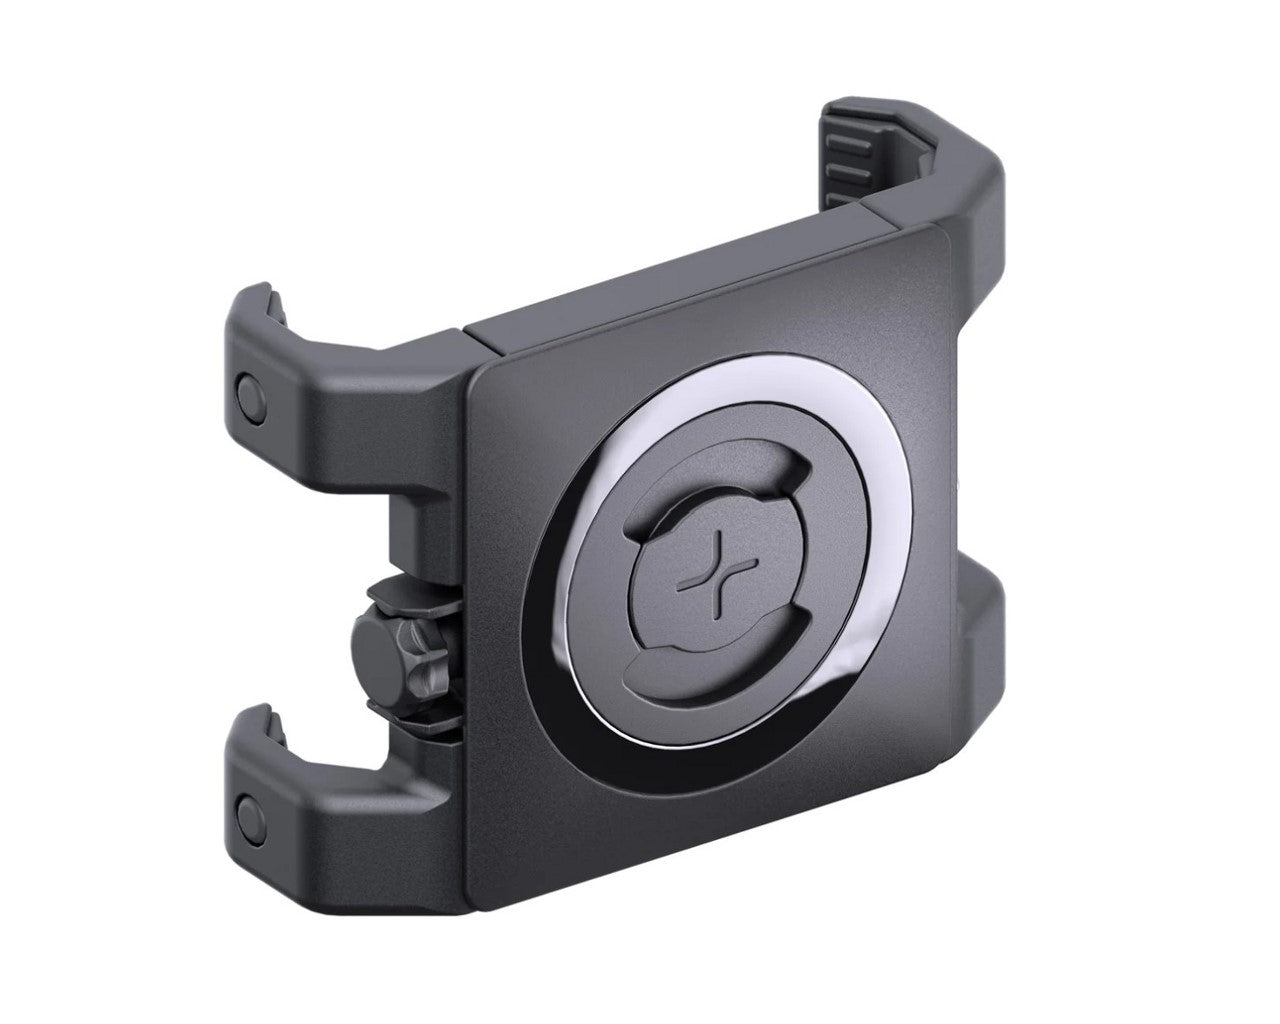 SP Connect SPC+ Phone Clamp Universal MAX 52657